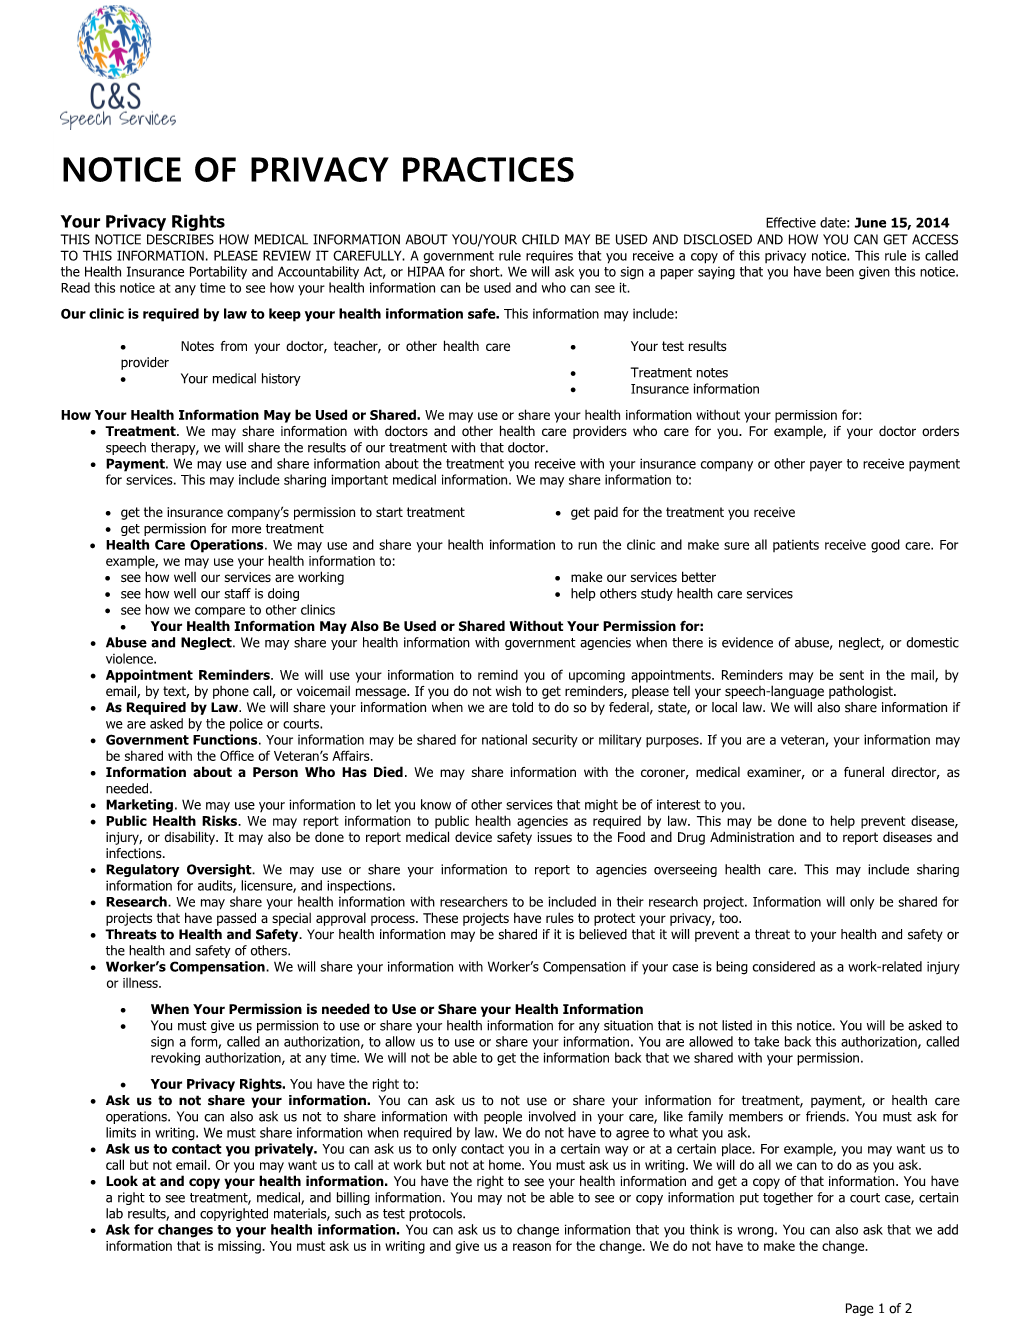 Your Privacy Rightseffective Date: June 15, 2014